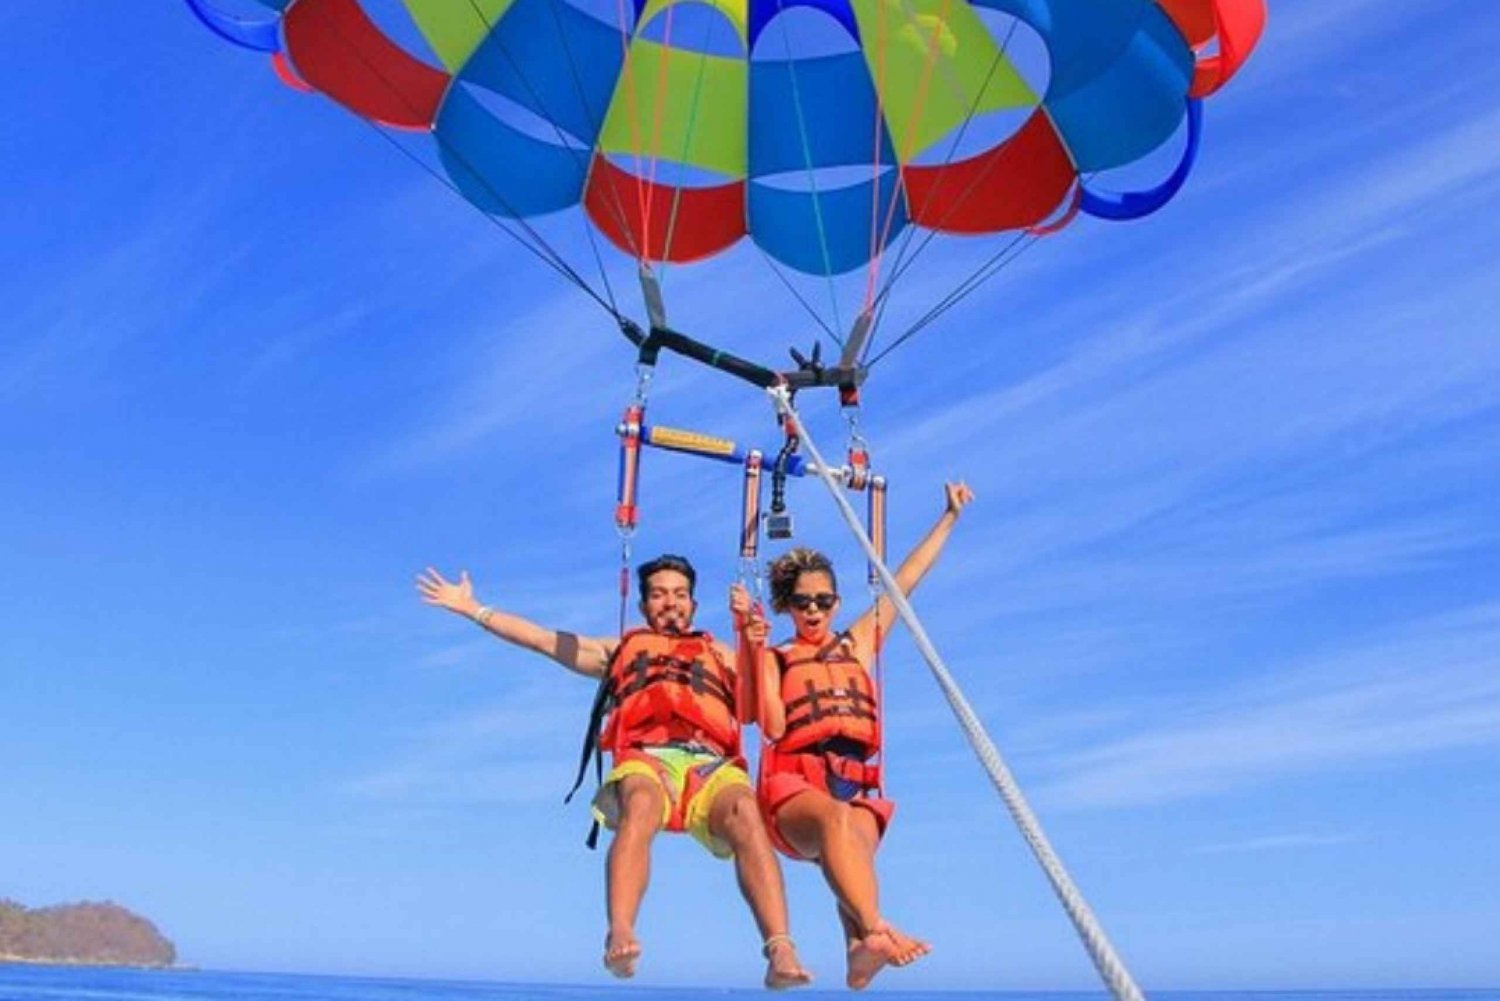 Adventure in the Heights: The Parasailing Experience